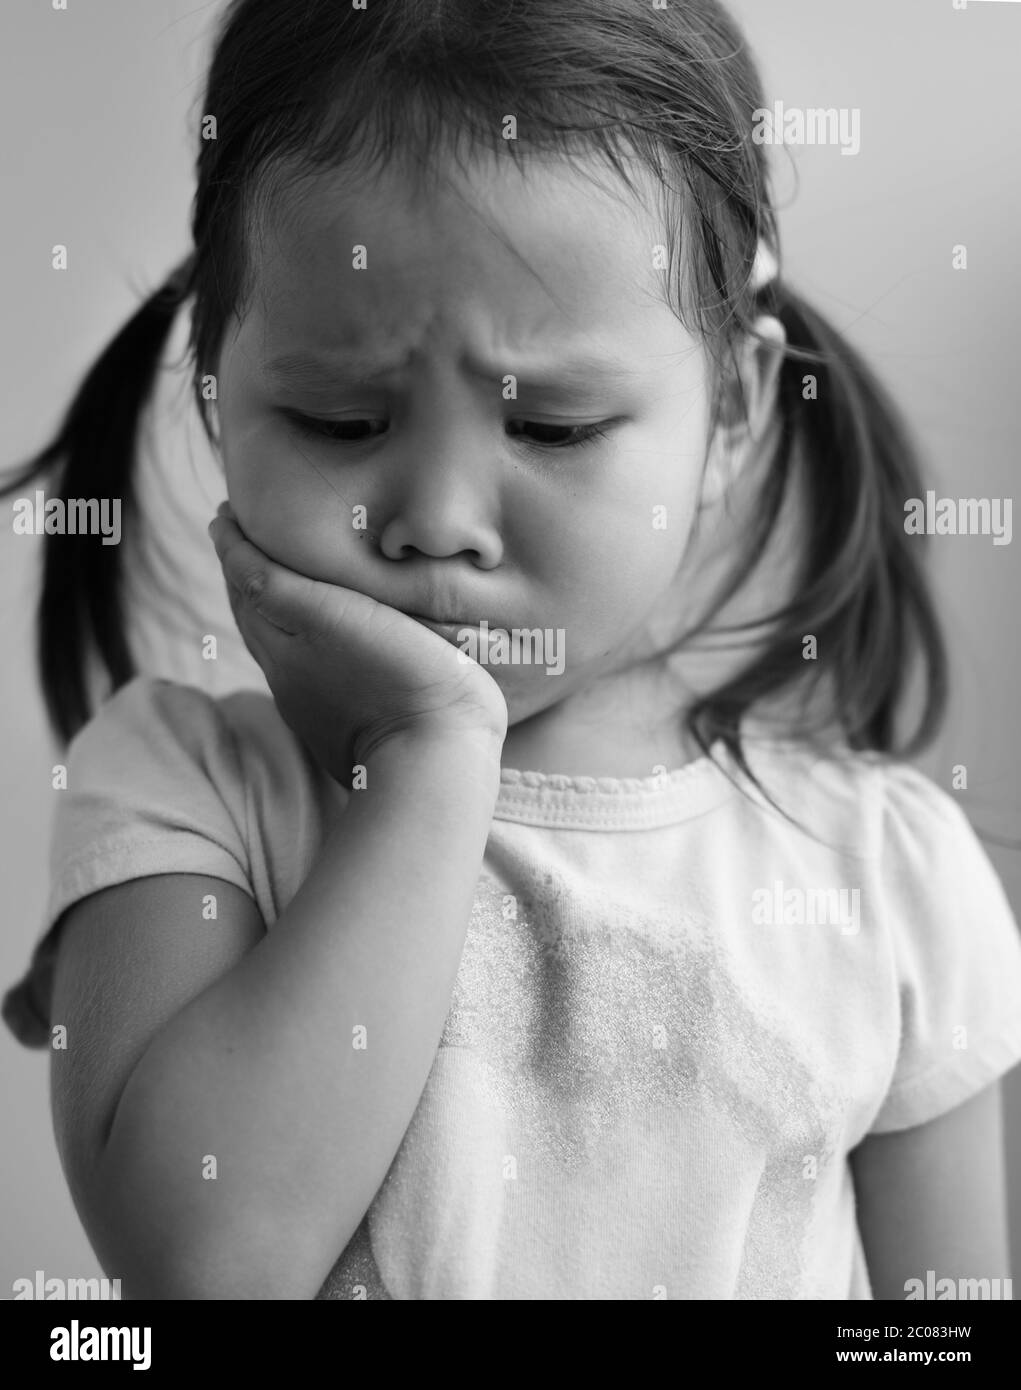 A portrait of a sad little girl crying and afraid in black and ...